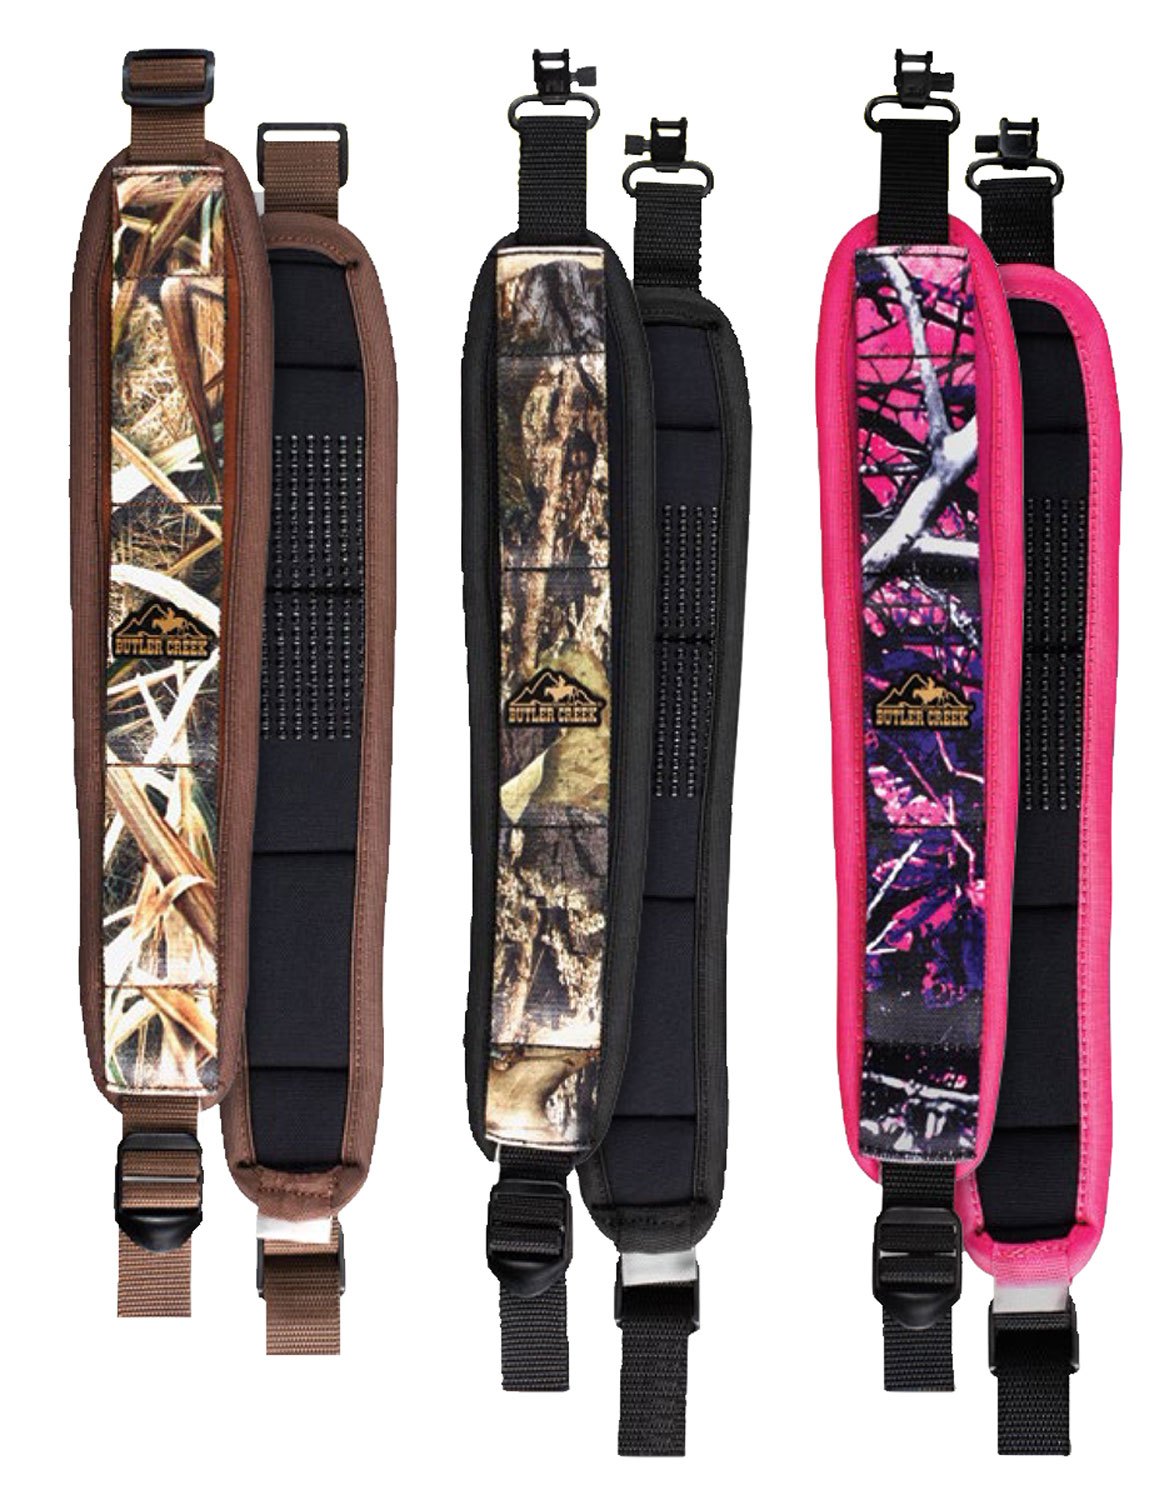 Butler Creek 181018 Comfort Stretch Sling made of Mossy Oak Obsession Neoprene with Non-Slip Grippers, Adjustable Design & QD Swivels for Rifles